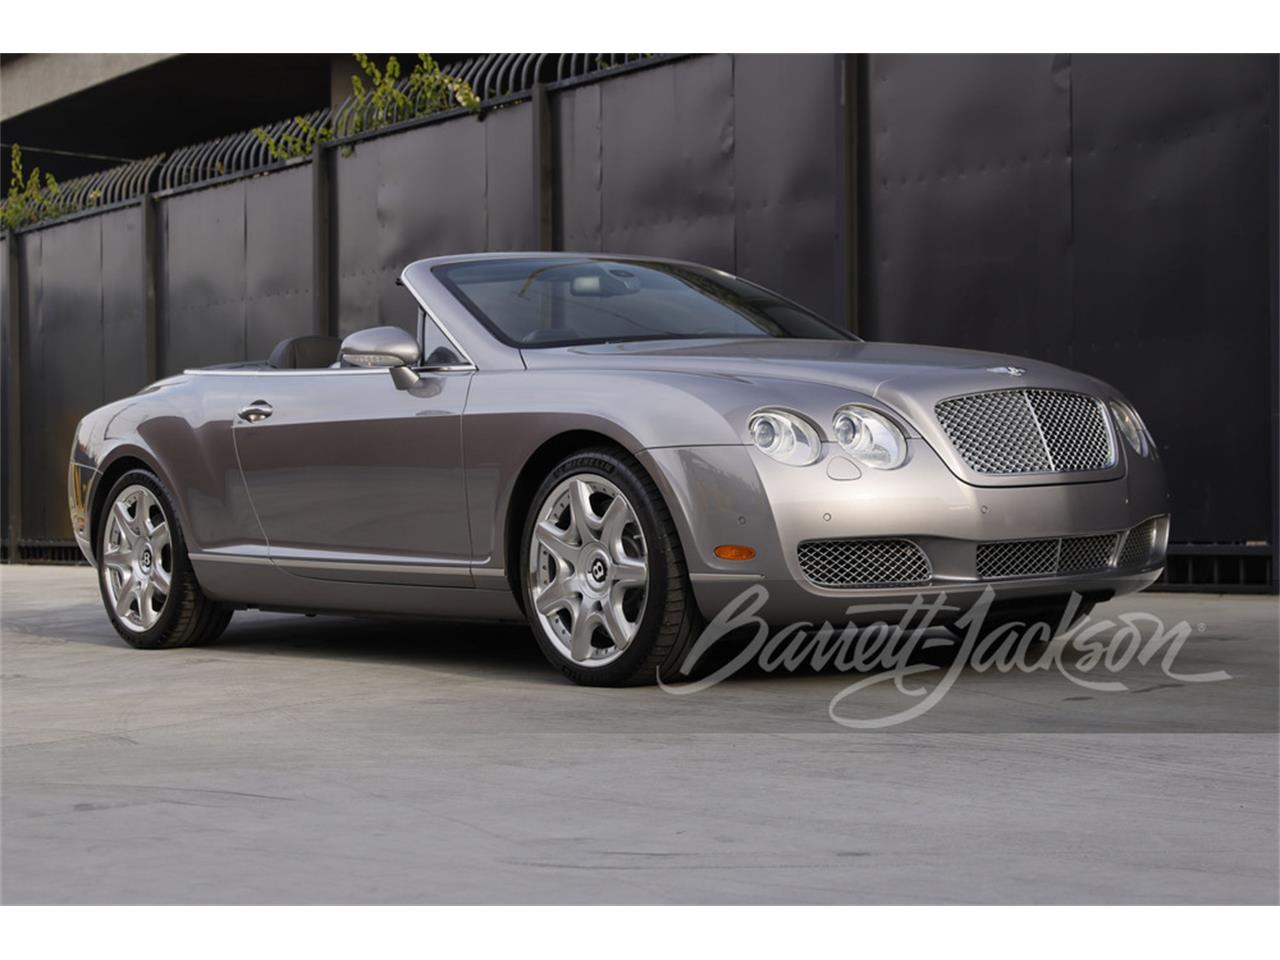 For Sale at Auction: 2008 Bentley Continental in Scottsdale, Arizona for sale in Scottsdale, AZ